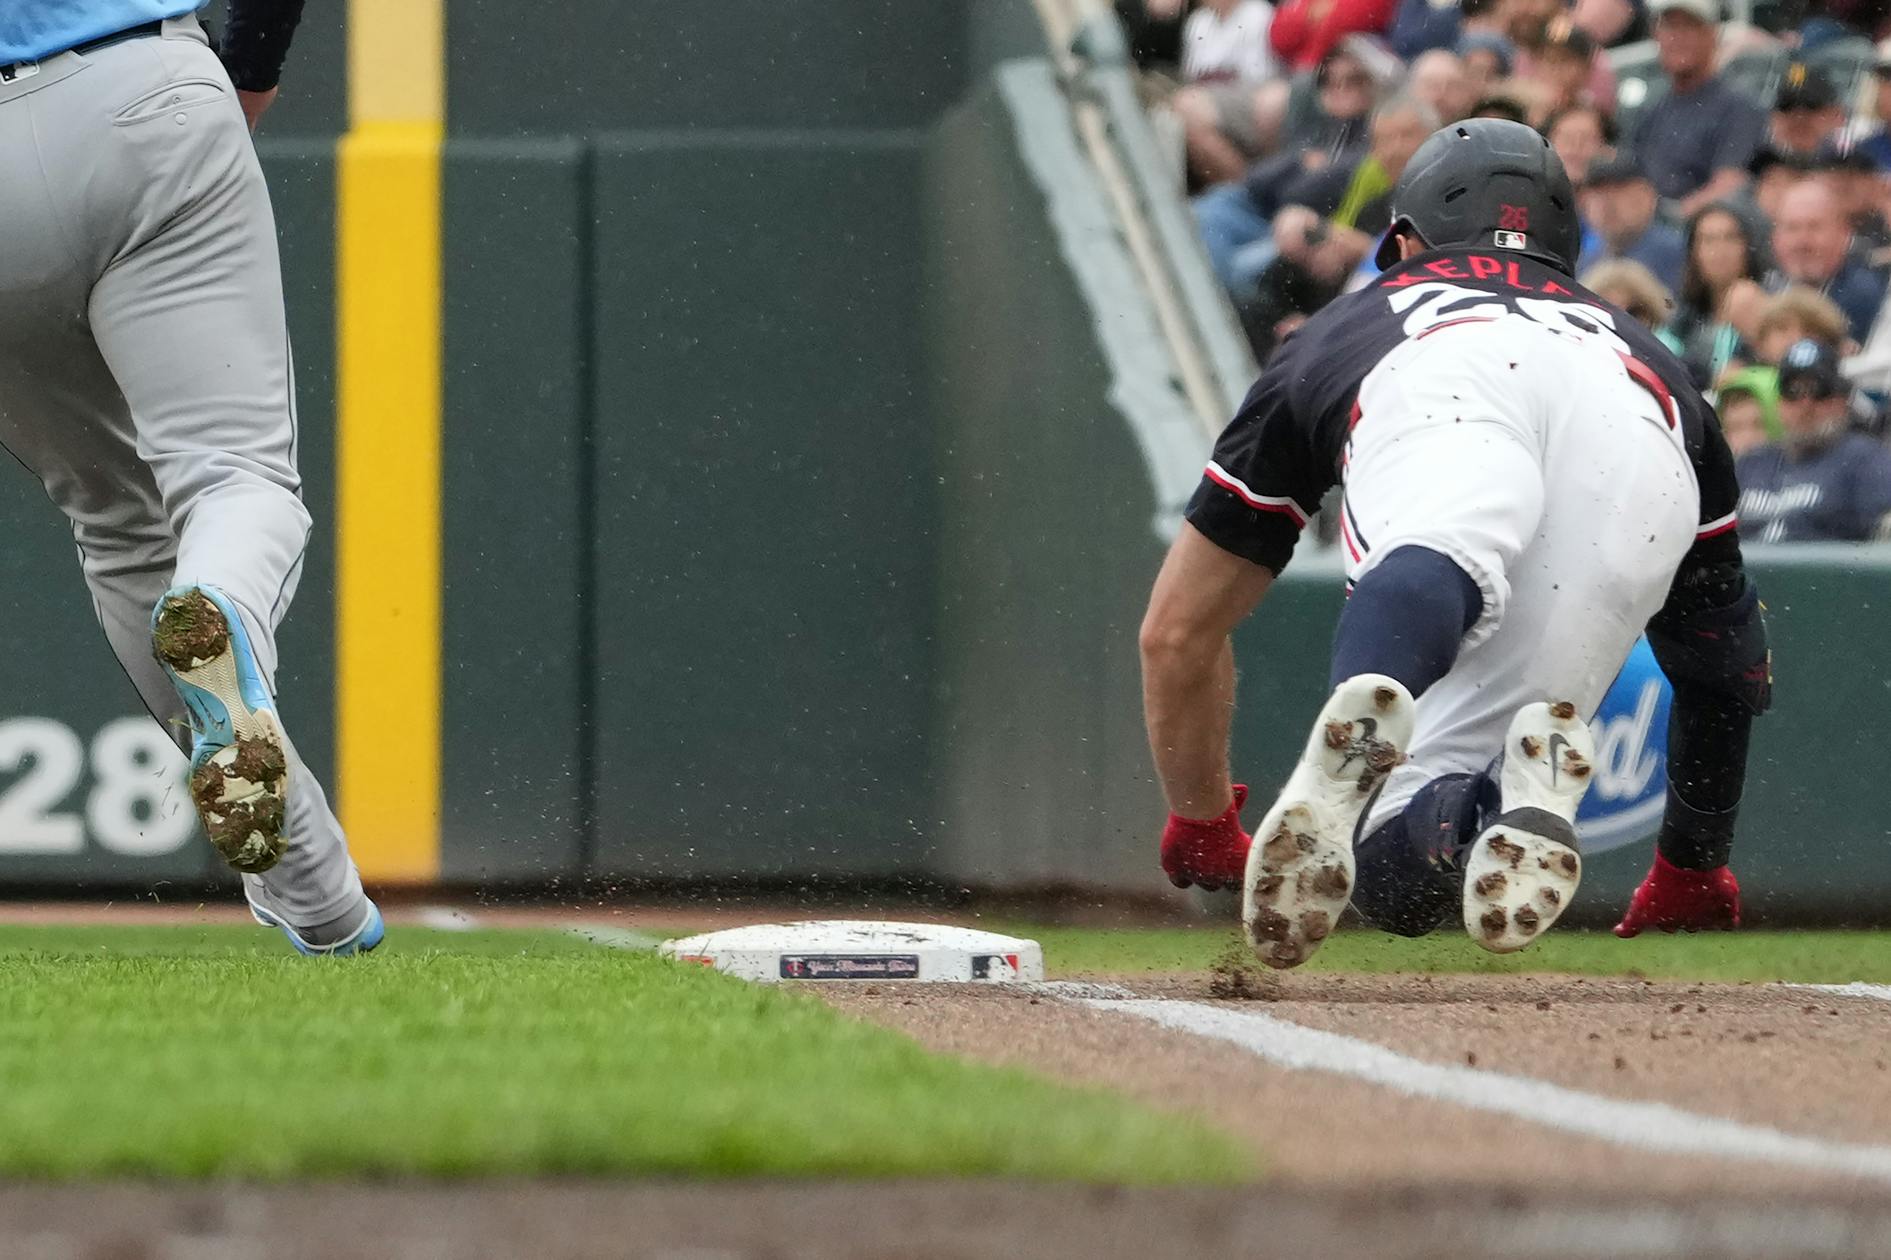 Twins outfielder Max Kepler leaves the game against the Rays after suffering neck issues